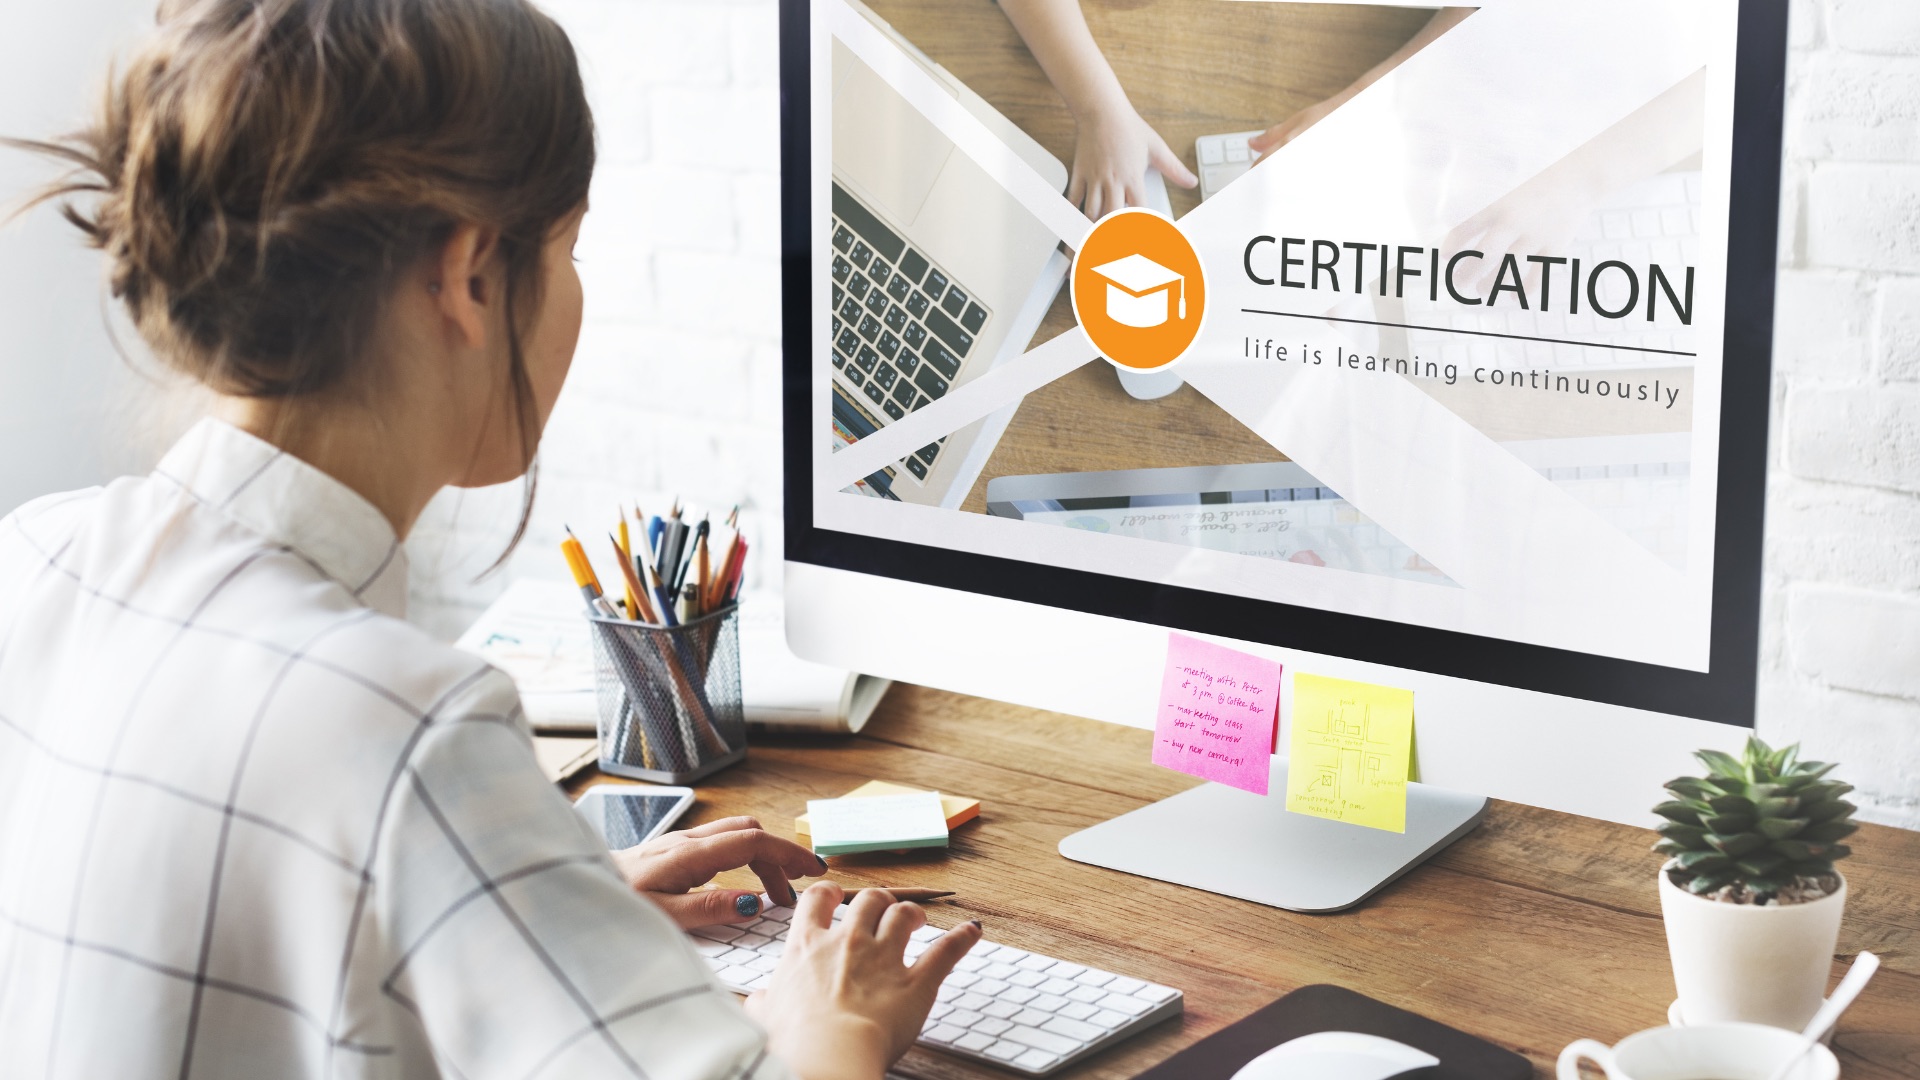 Certifications in cloud computing and cybersecurity is the name of the game